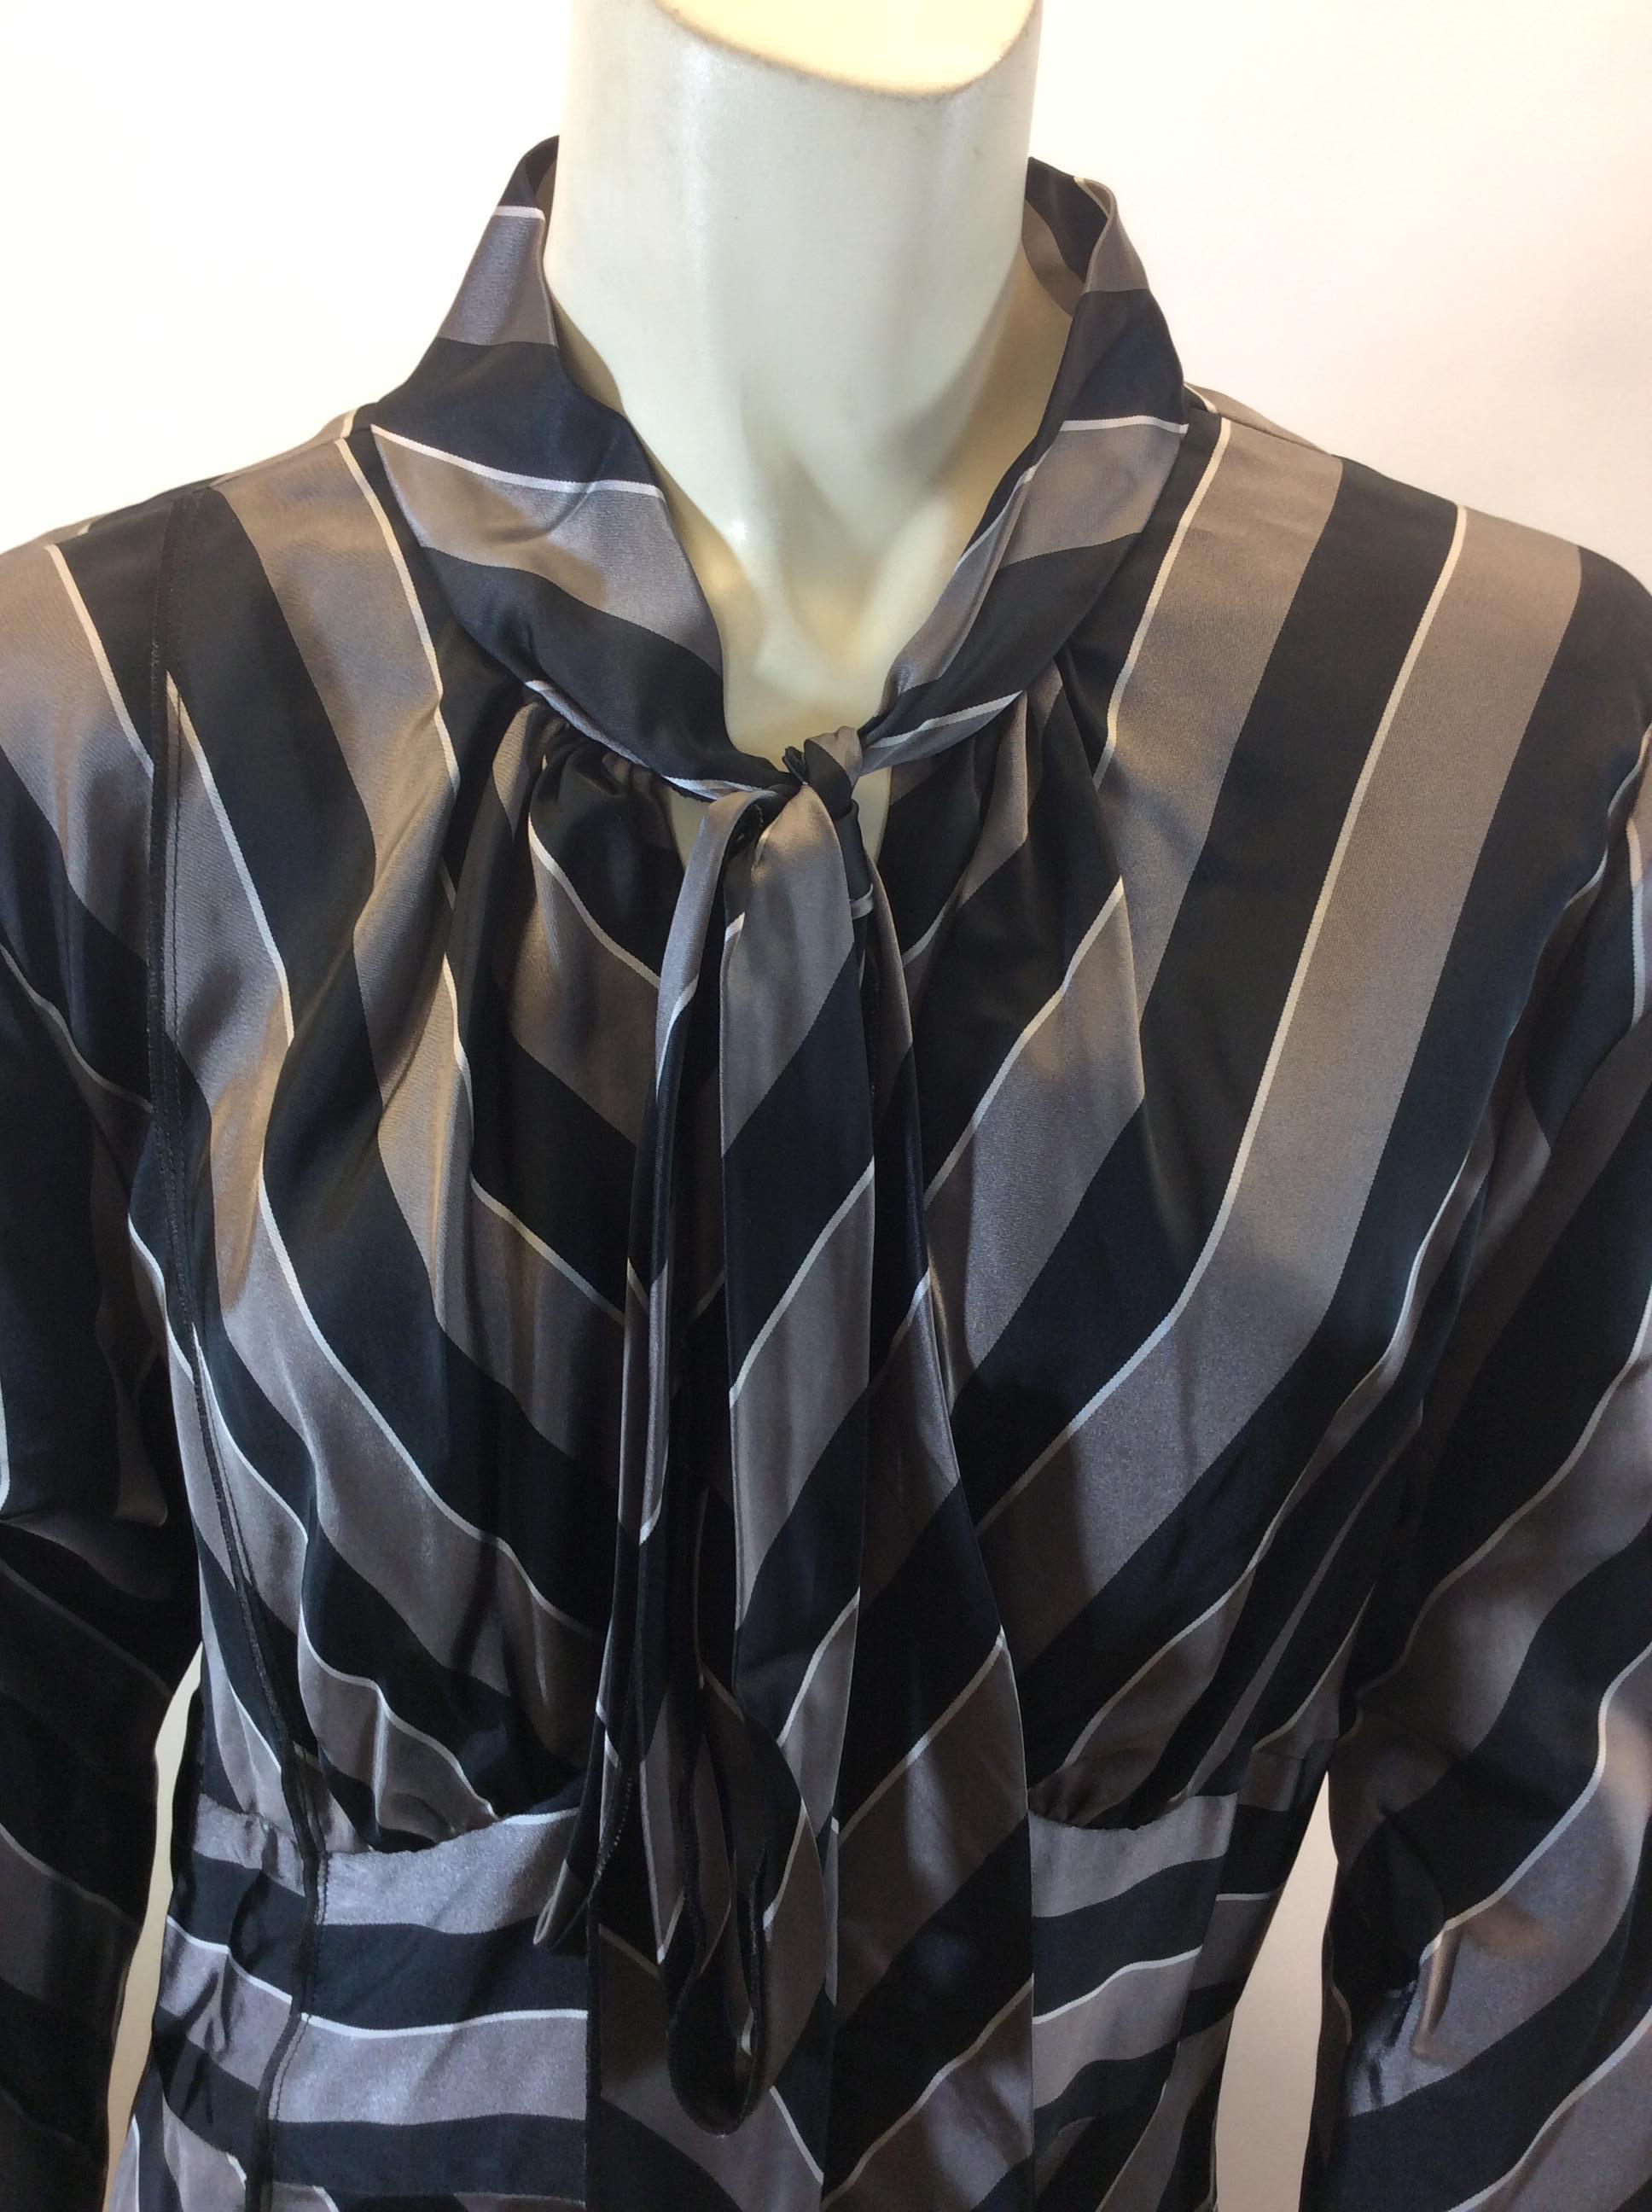 Marc Jacobs Black and Grey Stripe Dress NWT For Sale 2